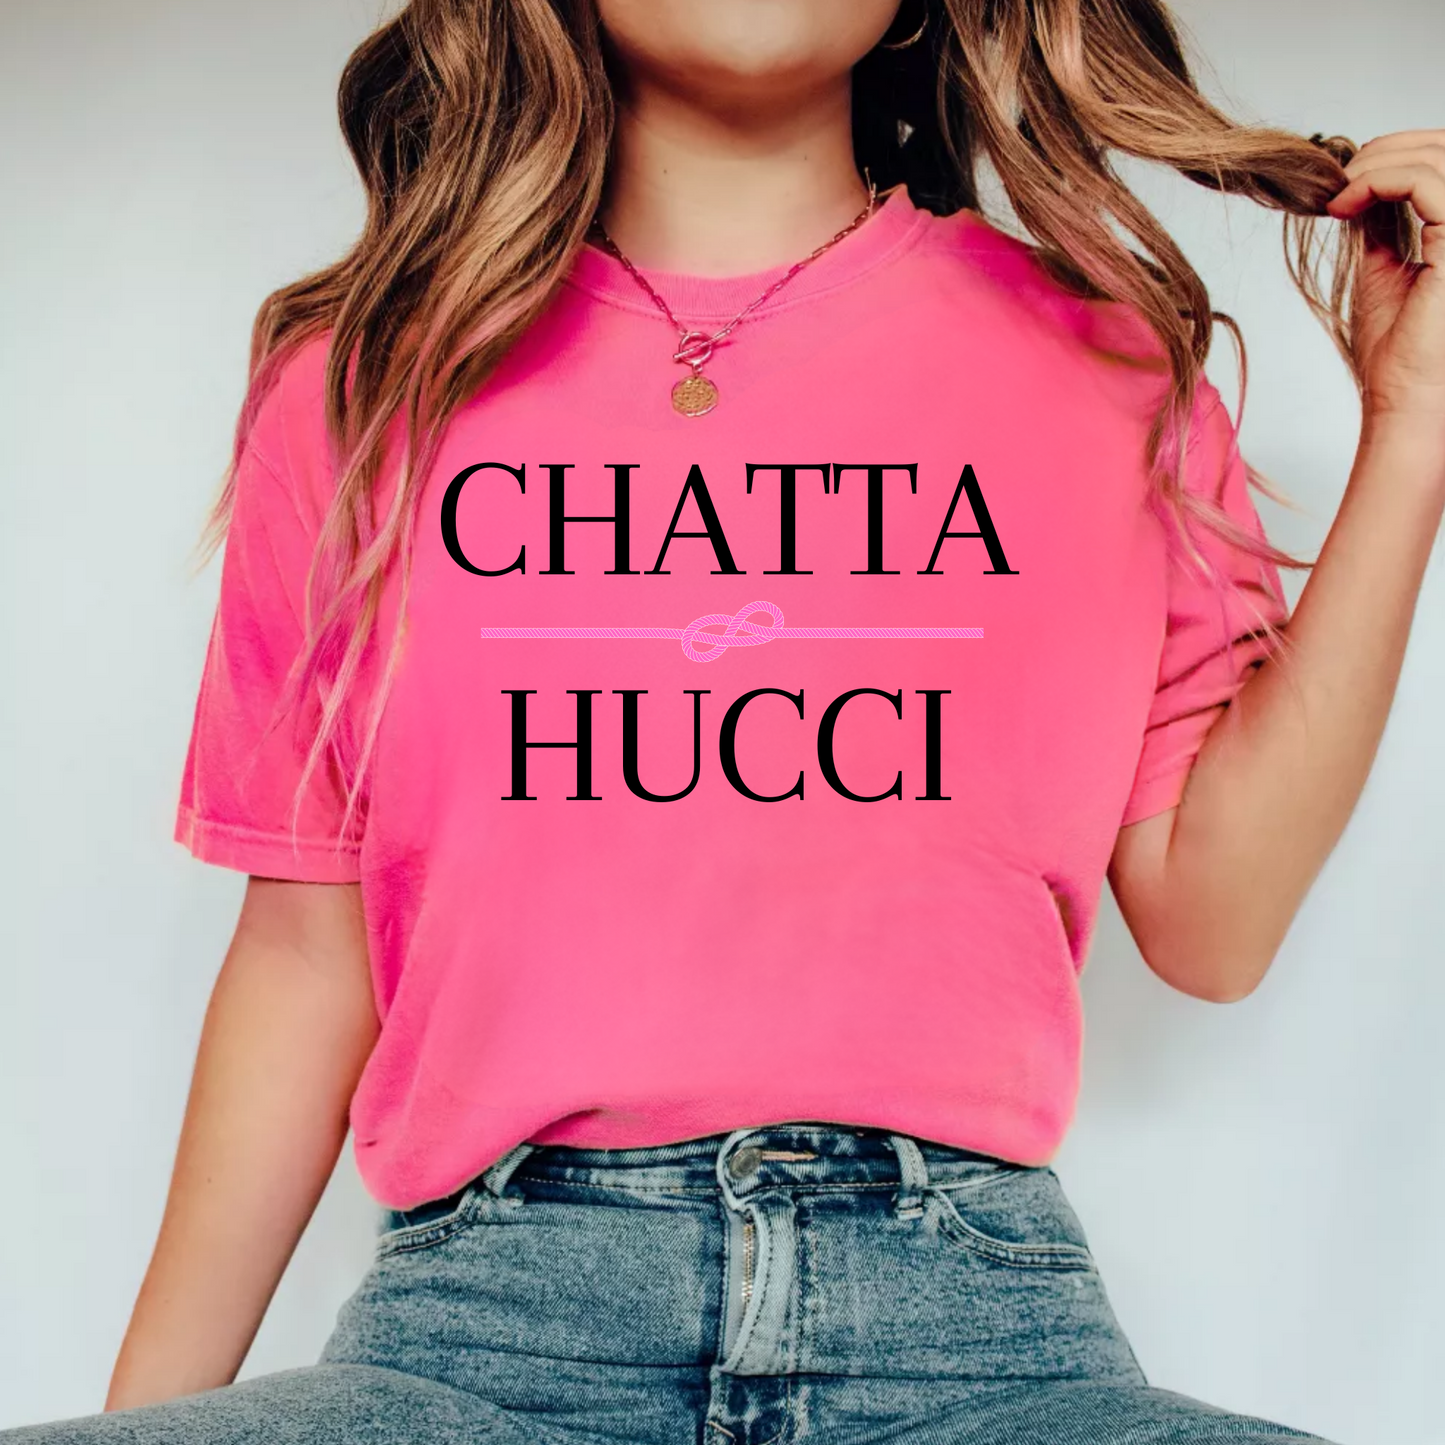 (shirt not included) CHATTA HUCCI - Clear Film Transfer